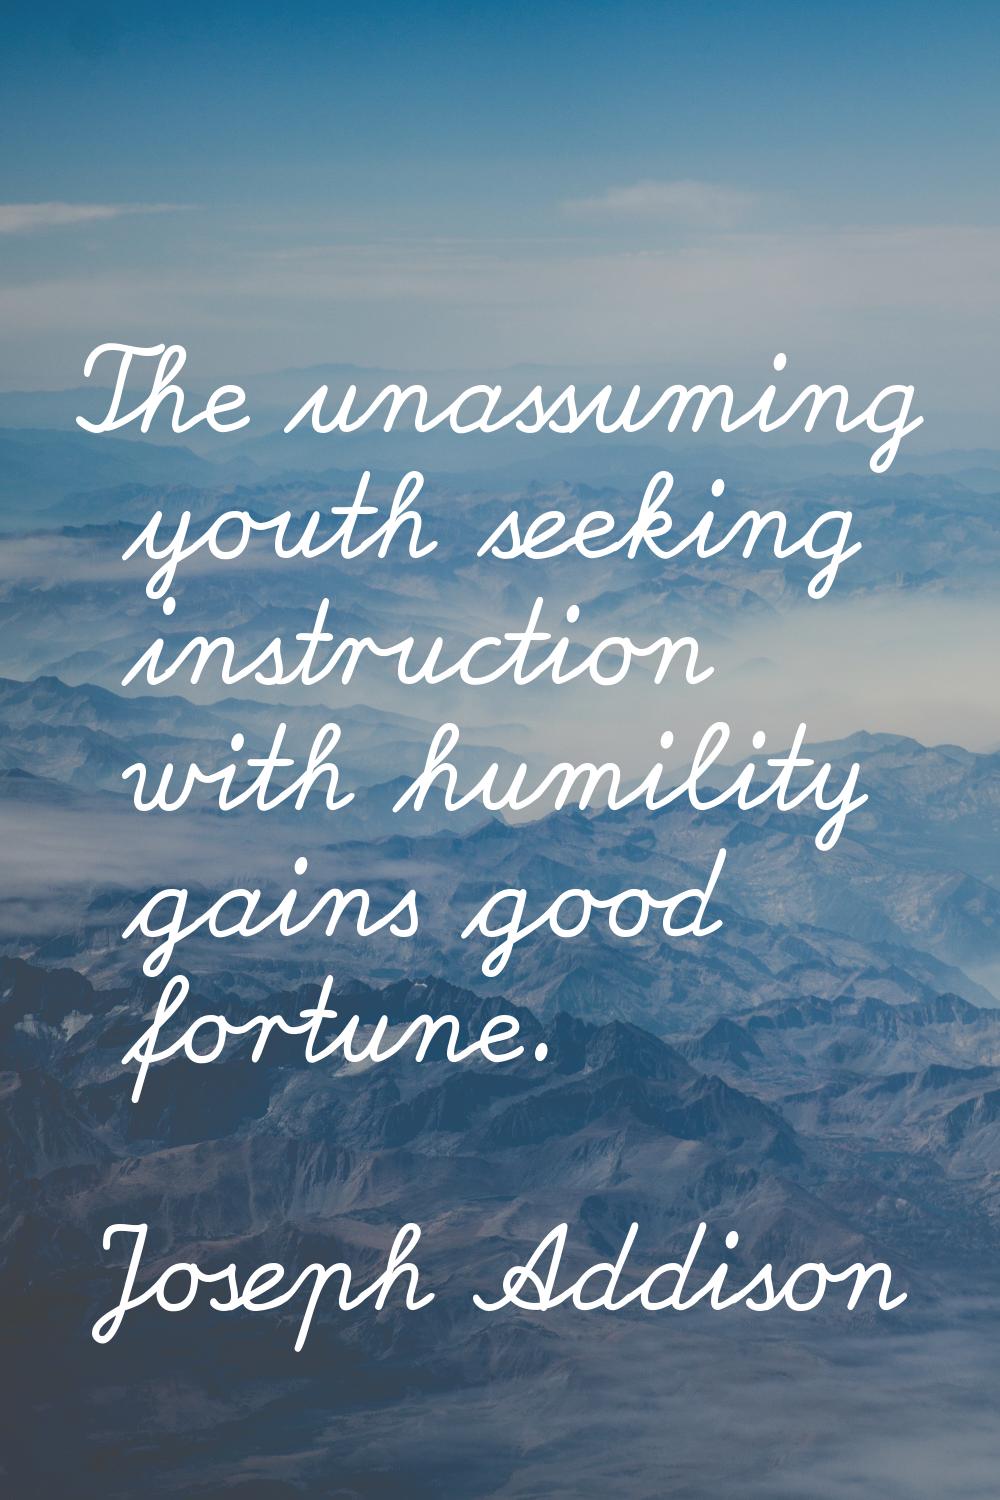 The unassuming youth seeking instruction with humility gains good fortune.